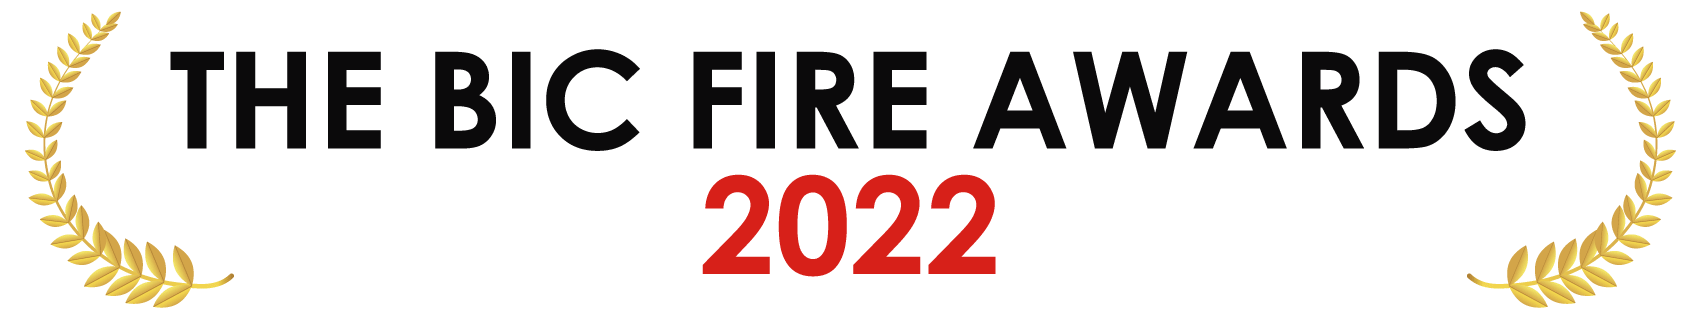 THE BIC FIRE AWARDS 2022